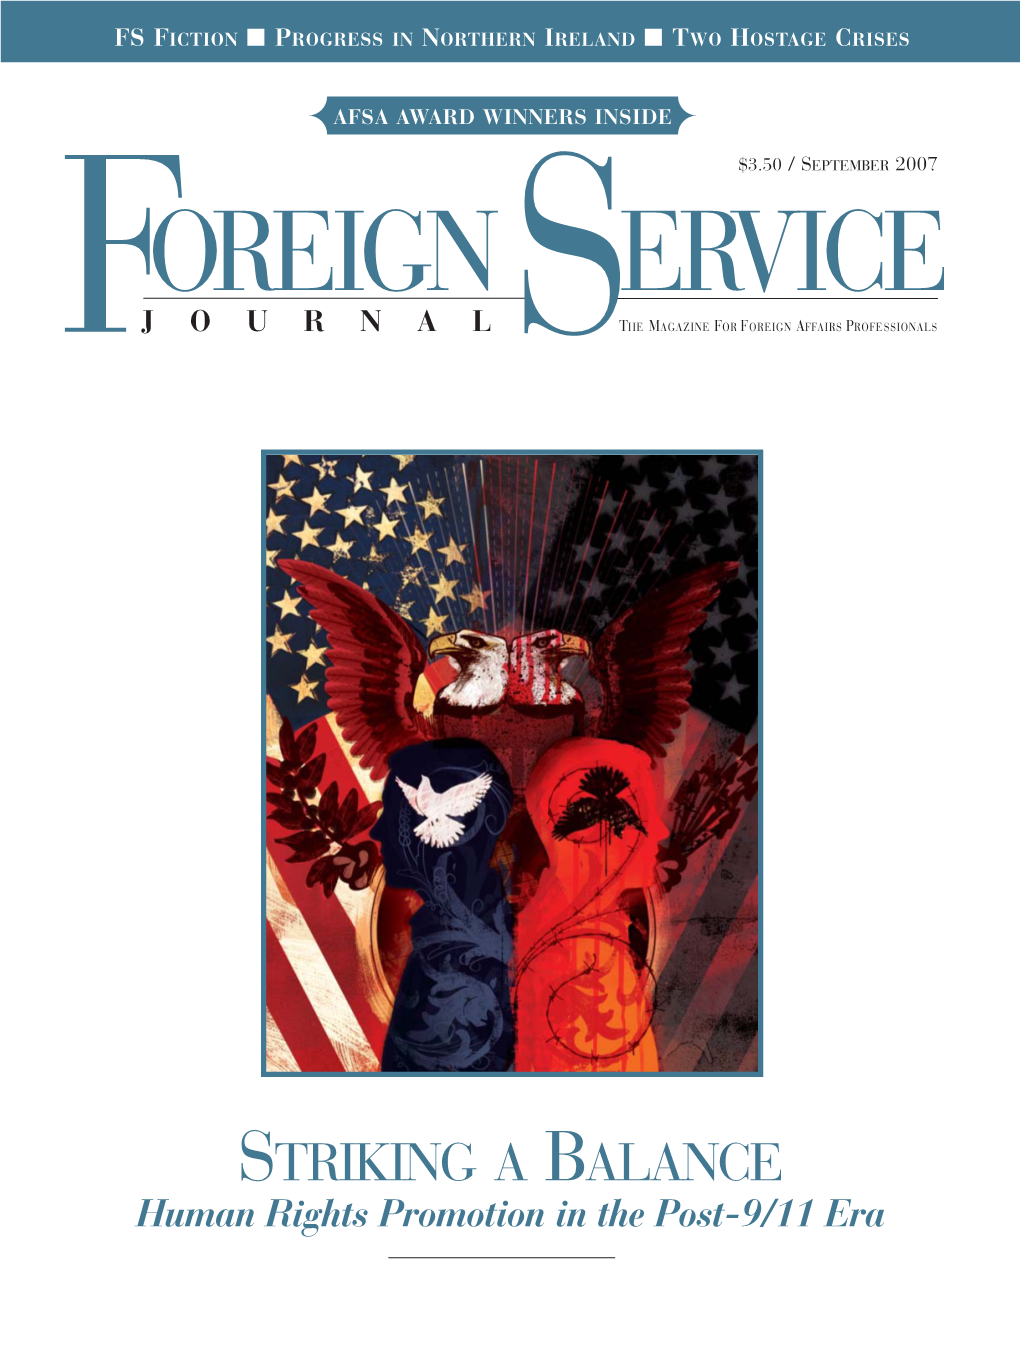 The Foreign Service Journal, September 2007